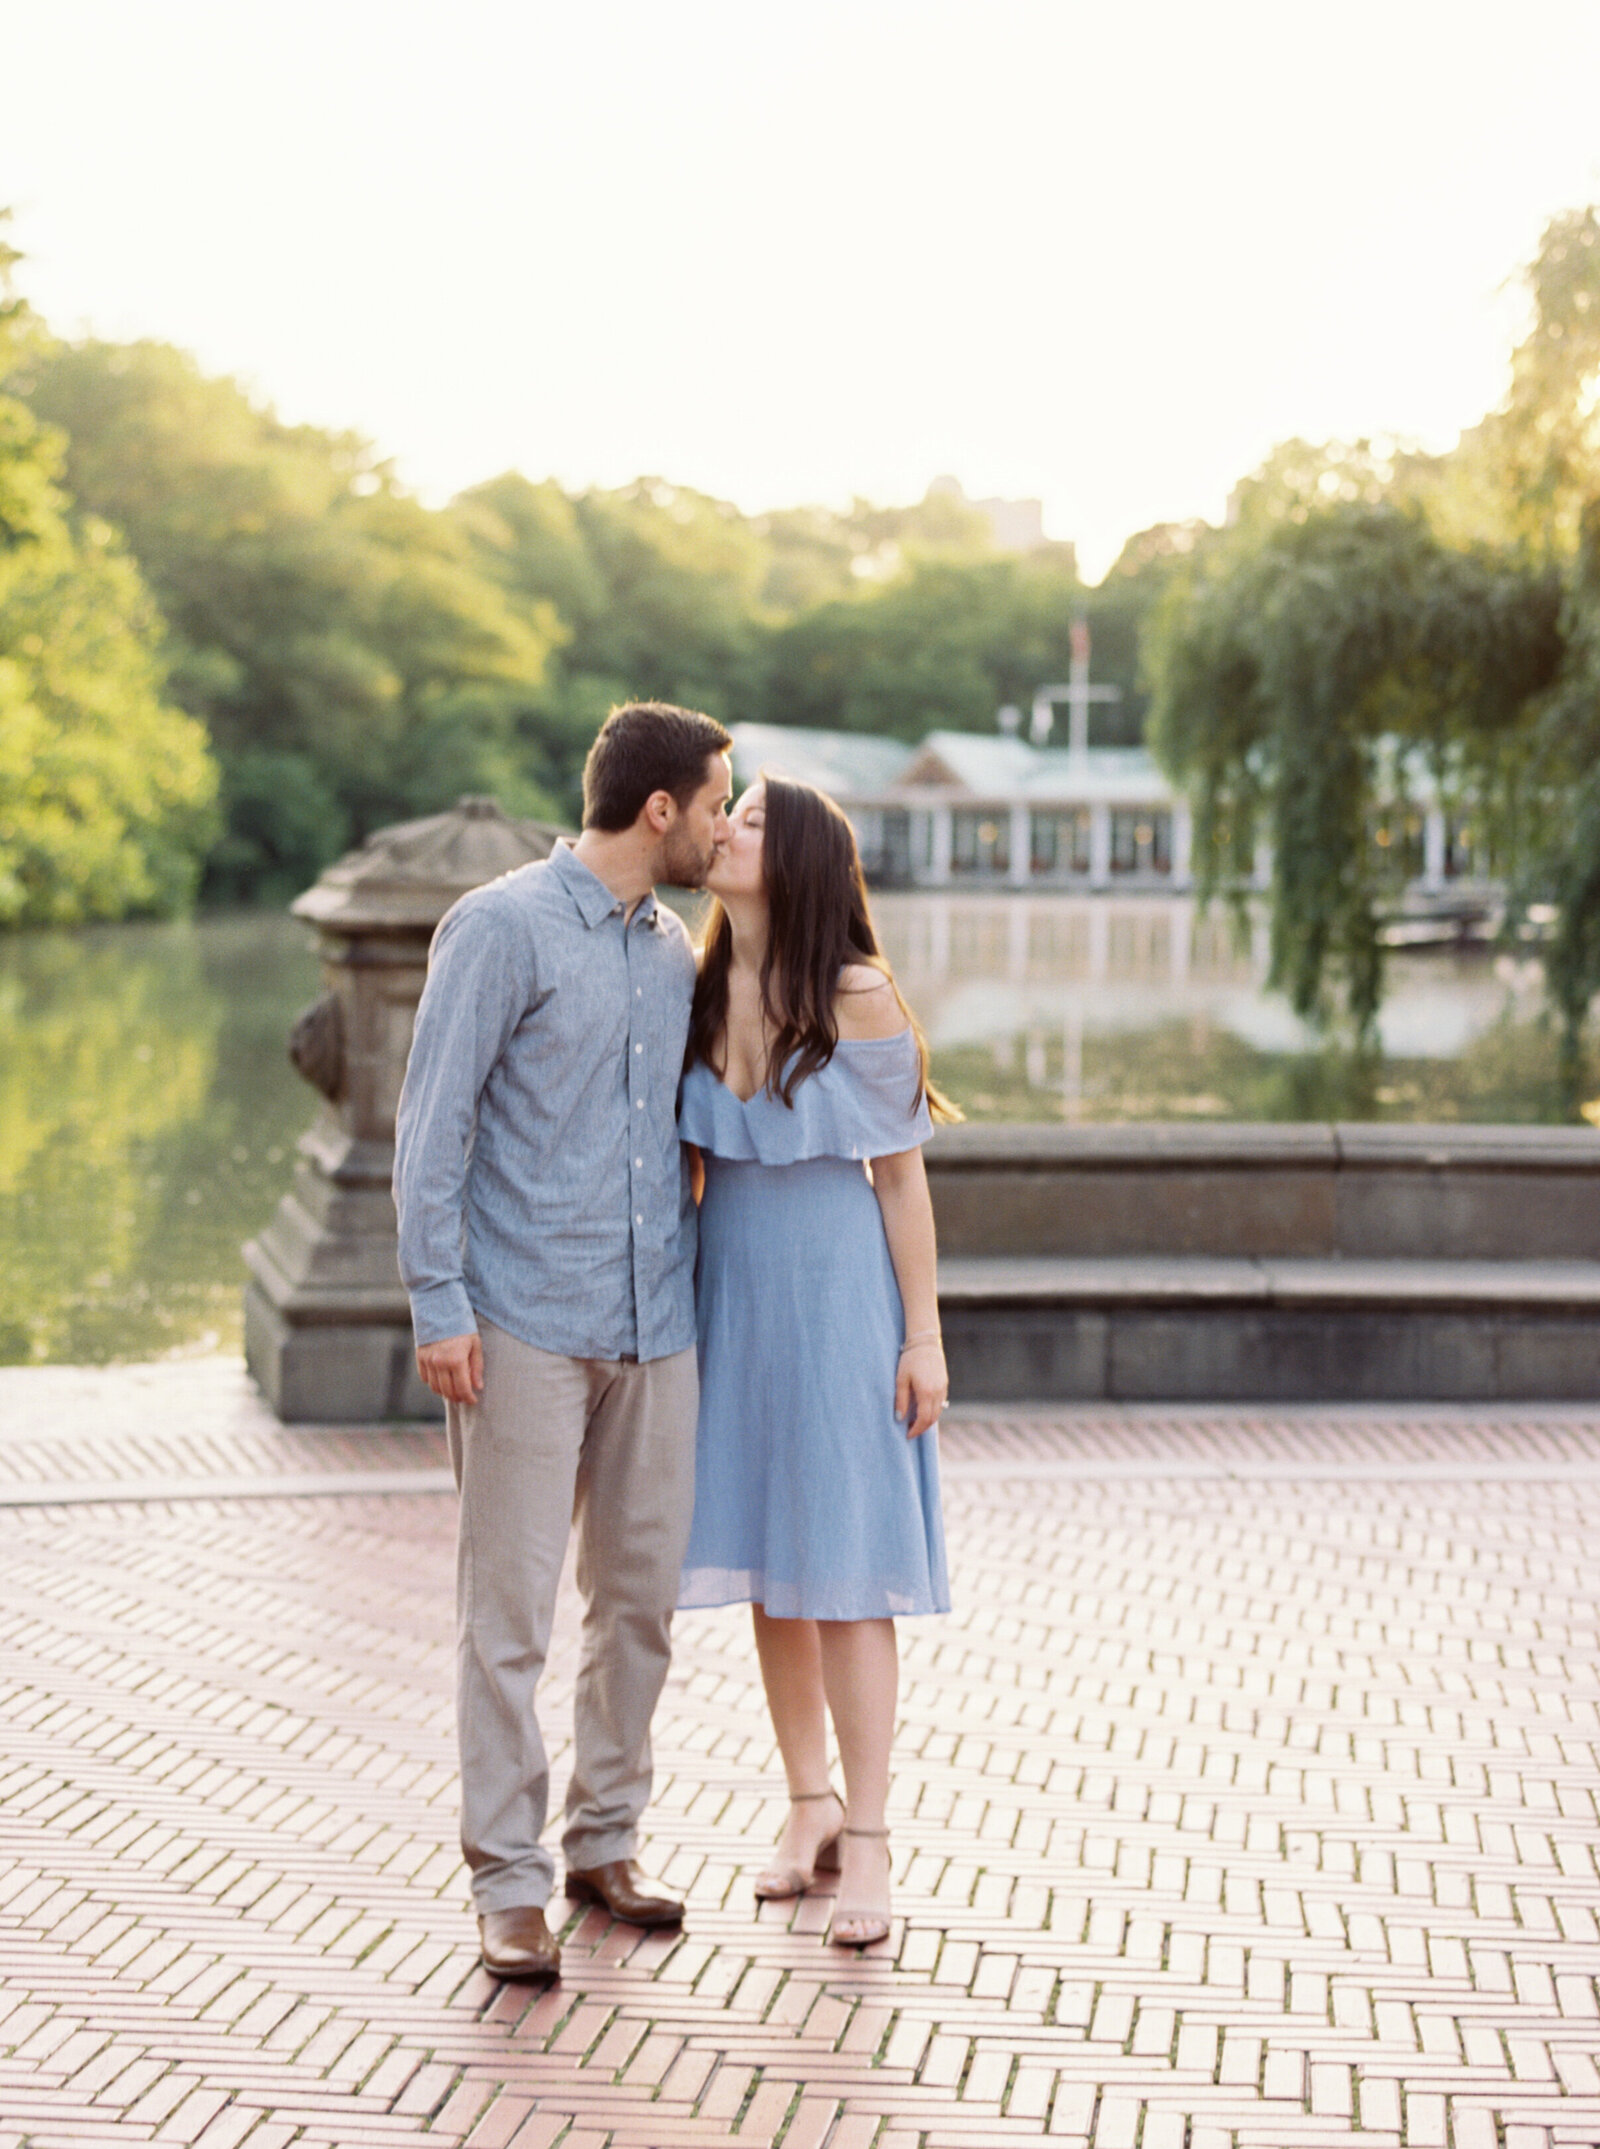 Kaylea Moreno_engagement gallery - Mike-Leia-engagement-session-10